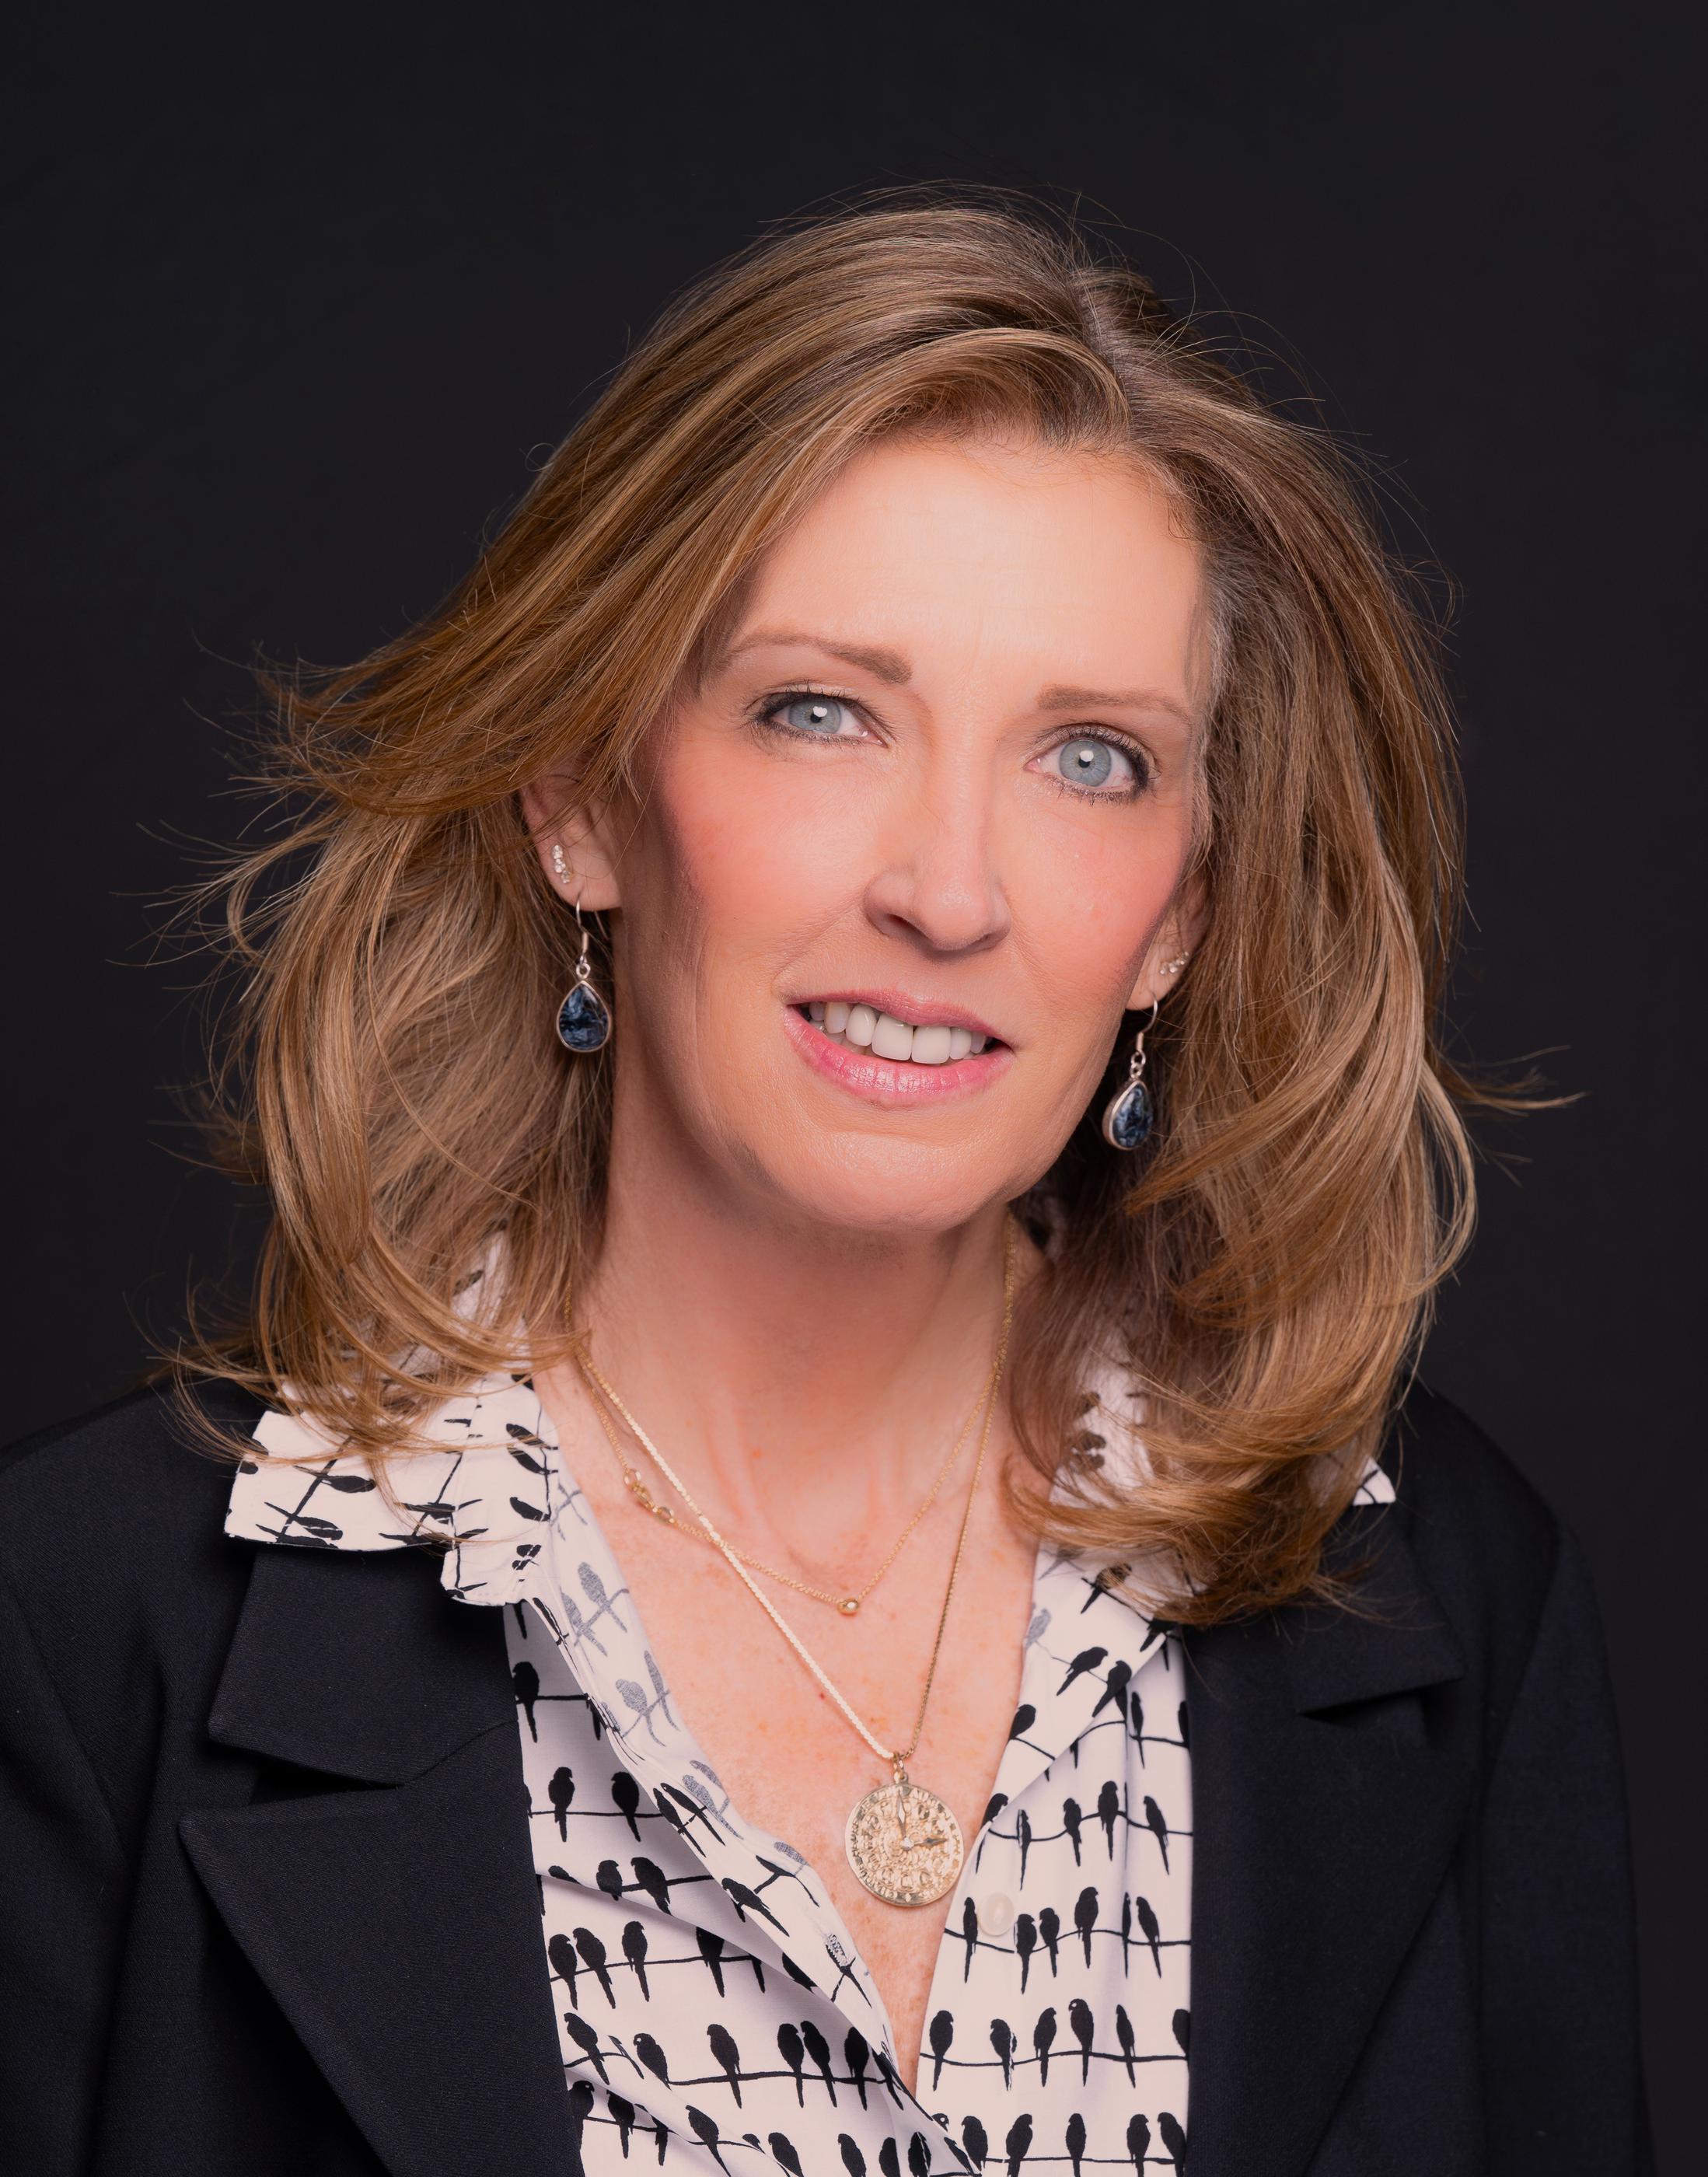 Zymeda Provider Solutions Appoints Debra Myers-Adams as Director of Client Growth & Strategy